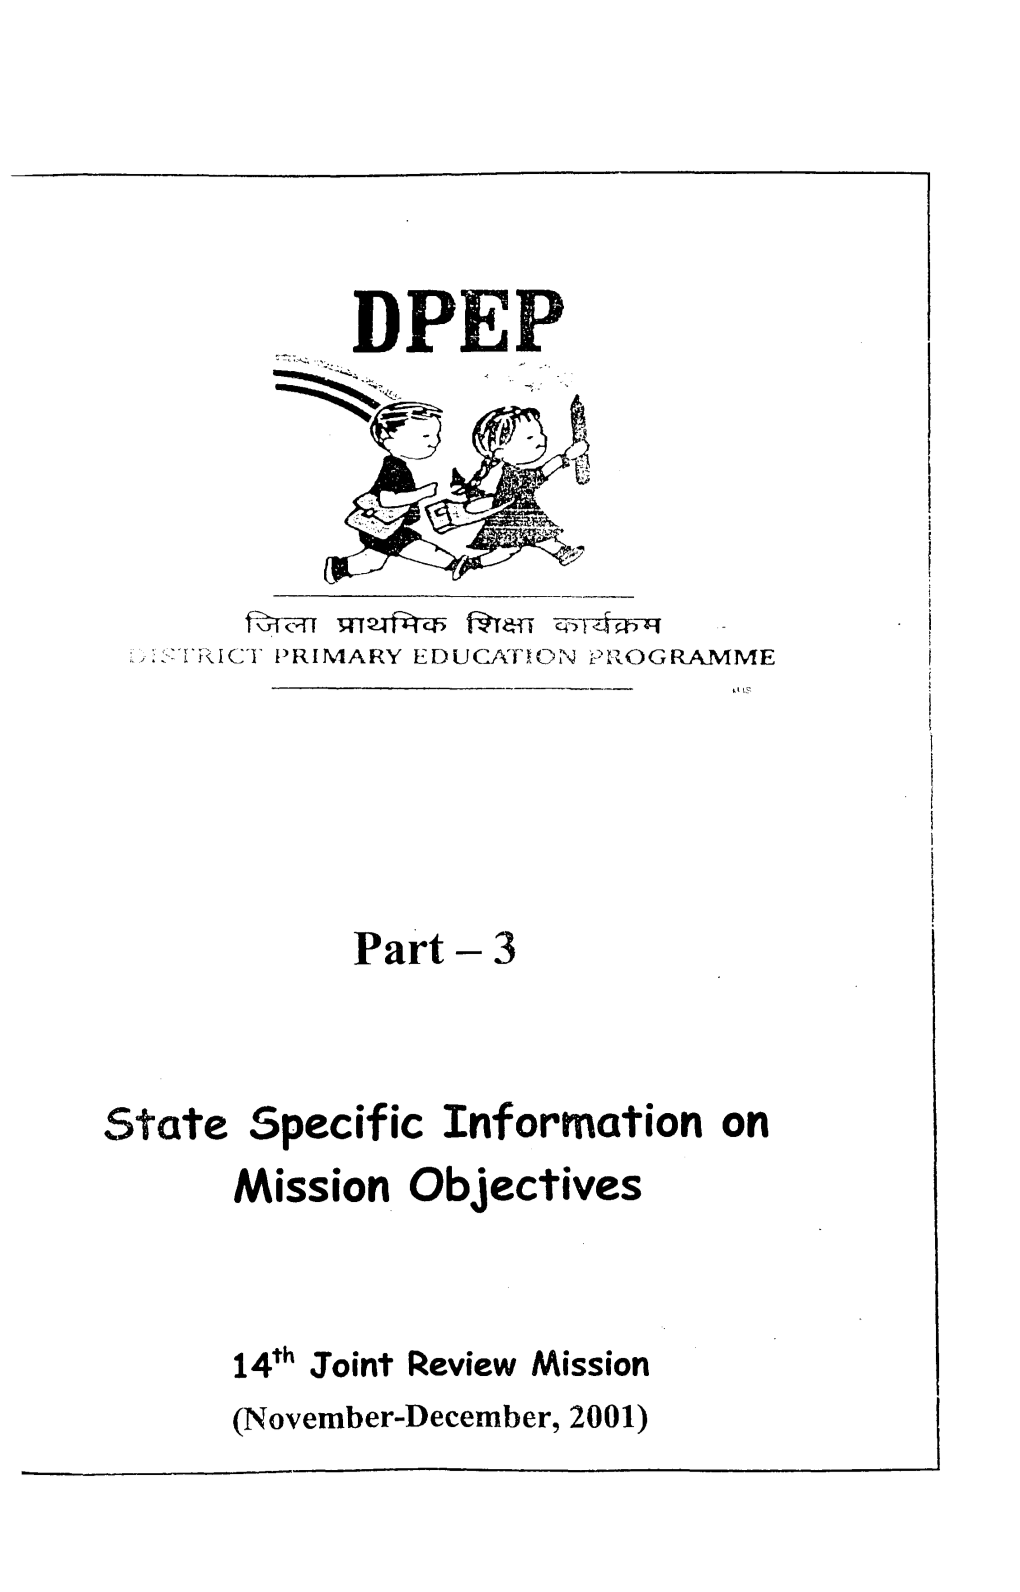 State Specific Information on Mission Objectives